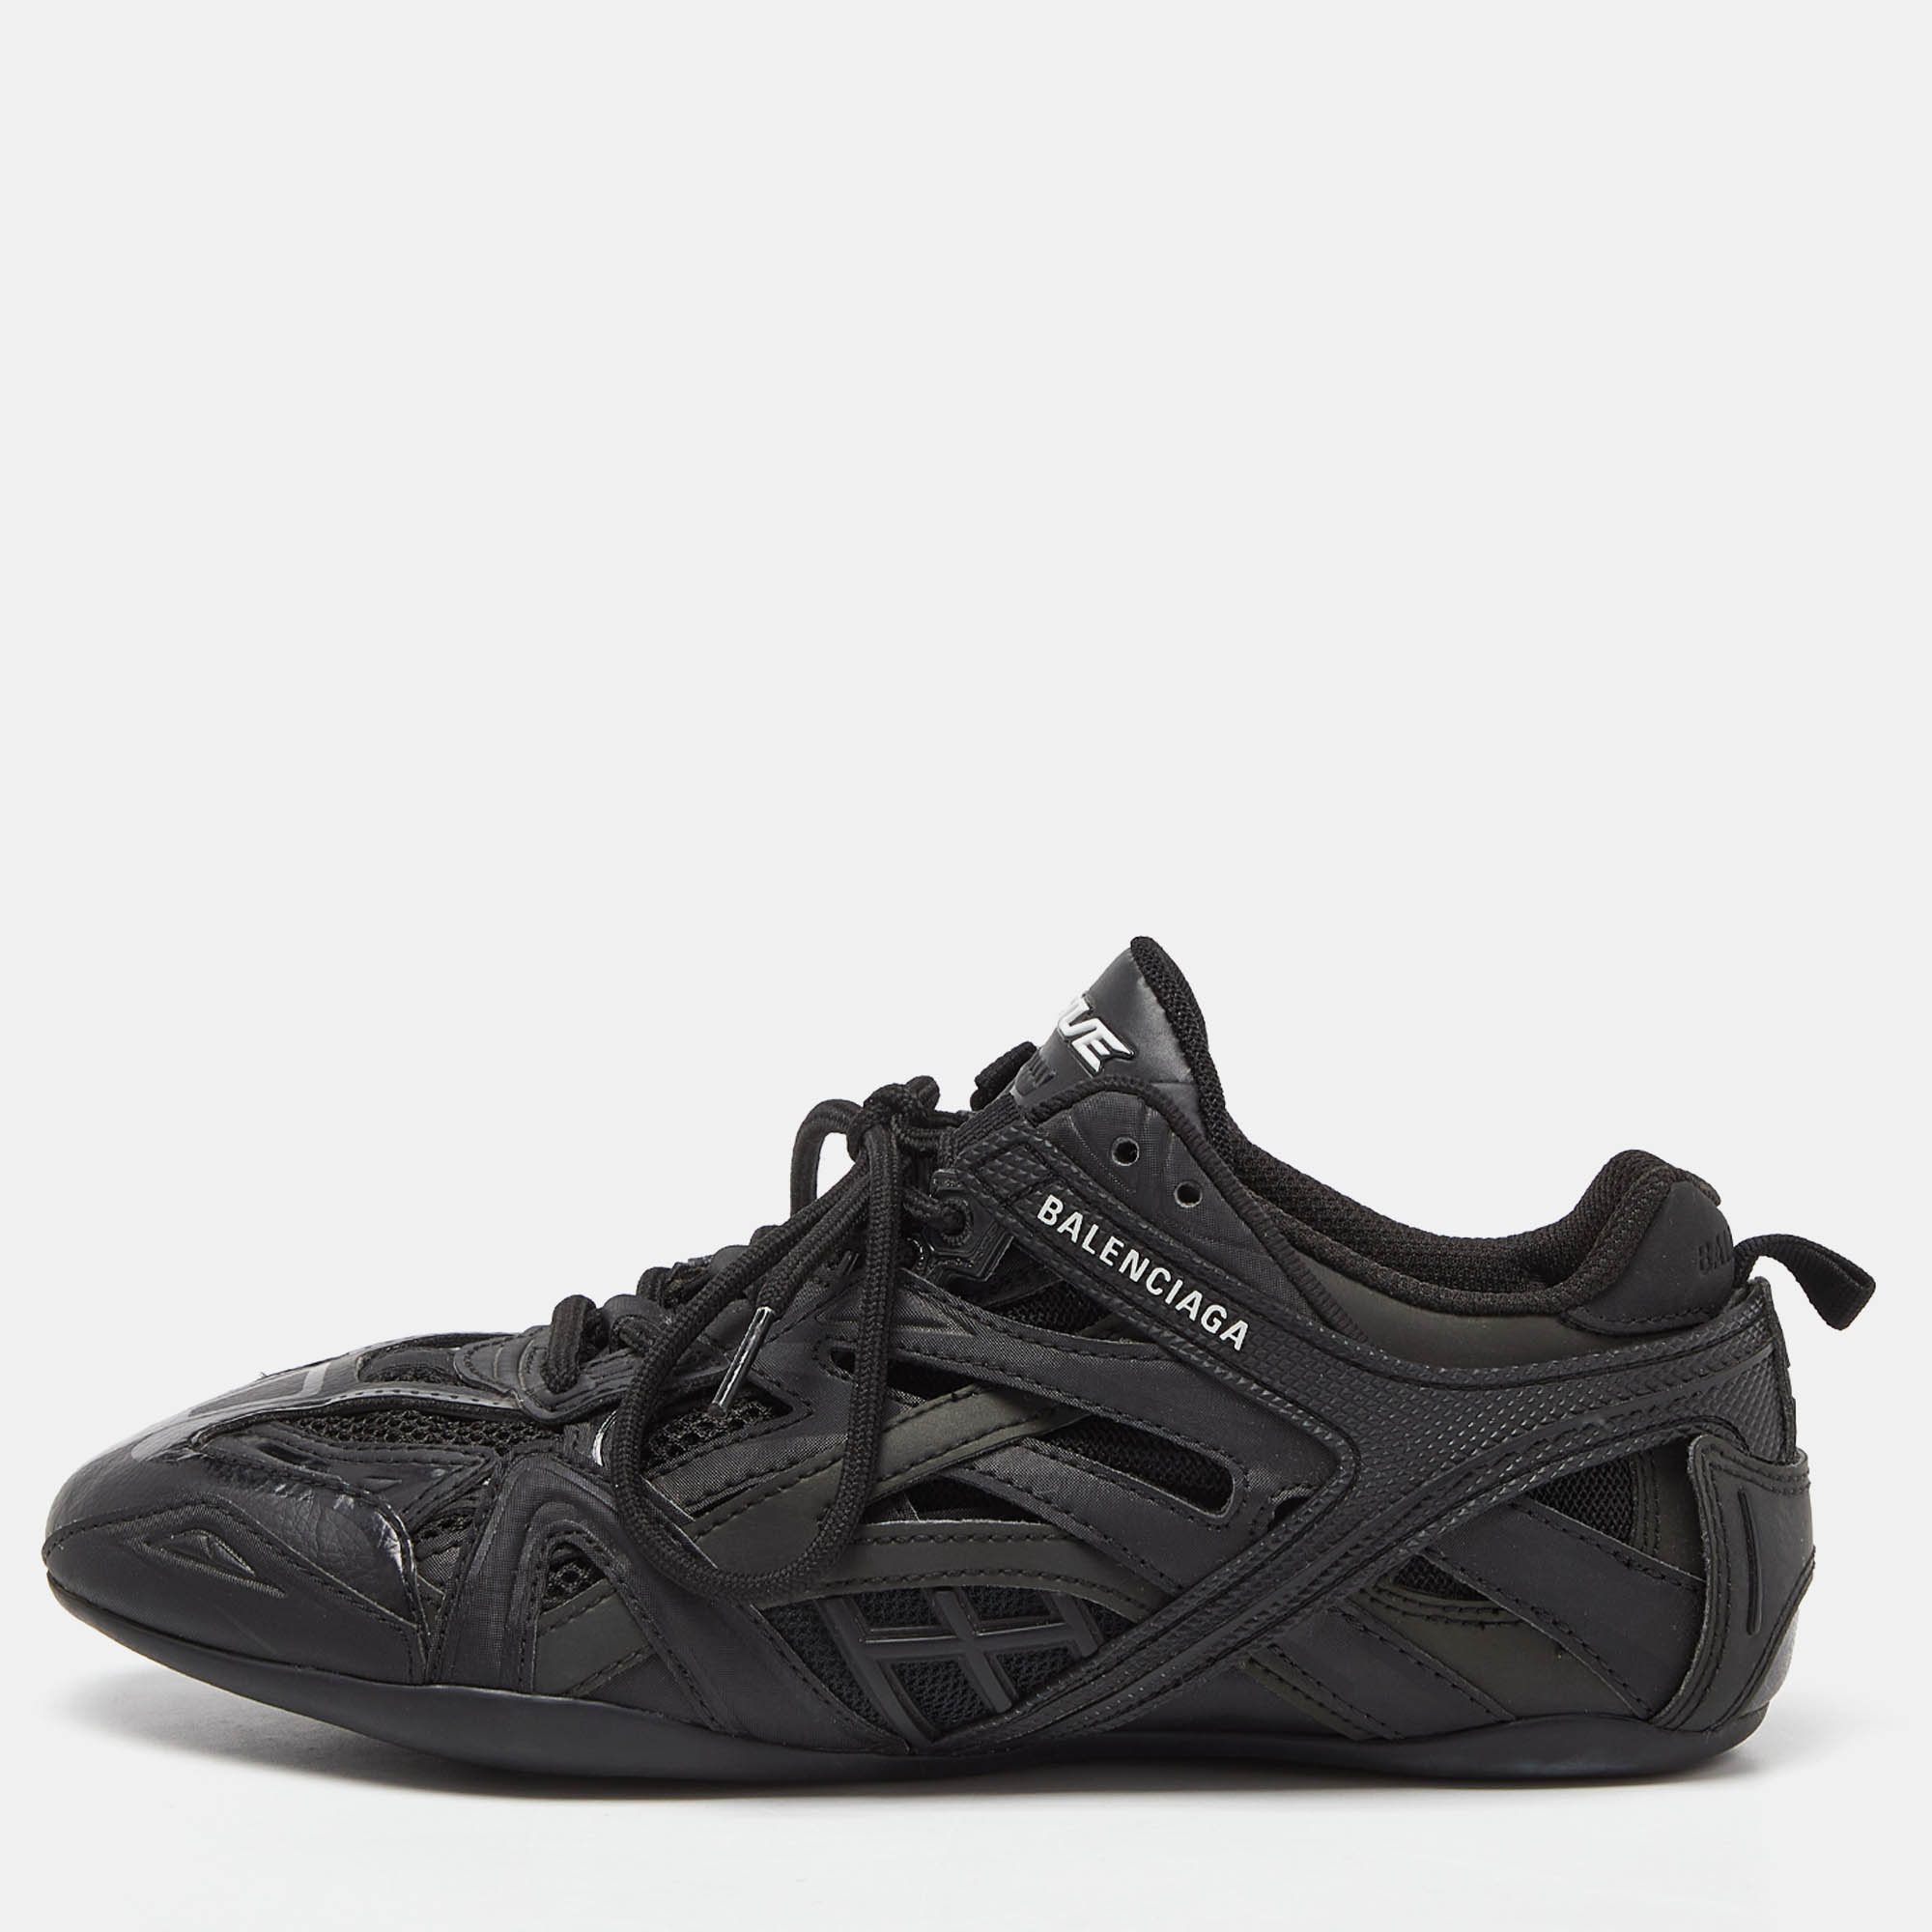 Add a fun vibe to your outfit with these bright eye catching Balenciaga Drive sneakers. Available in a classy black shade these sneakers will add liveliness to your look. Pair them with jeans knitted tight dresses skirts for a chic look.